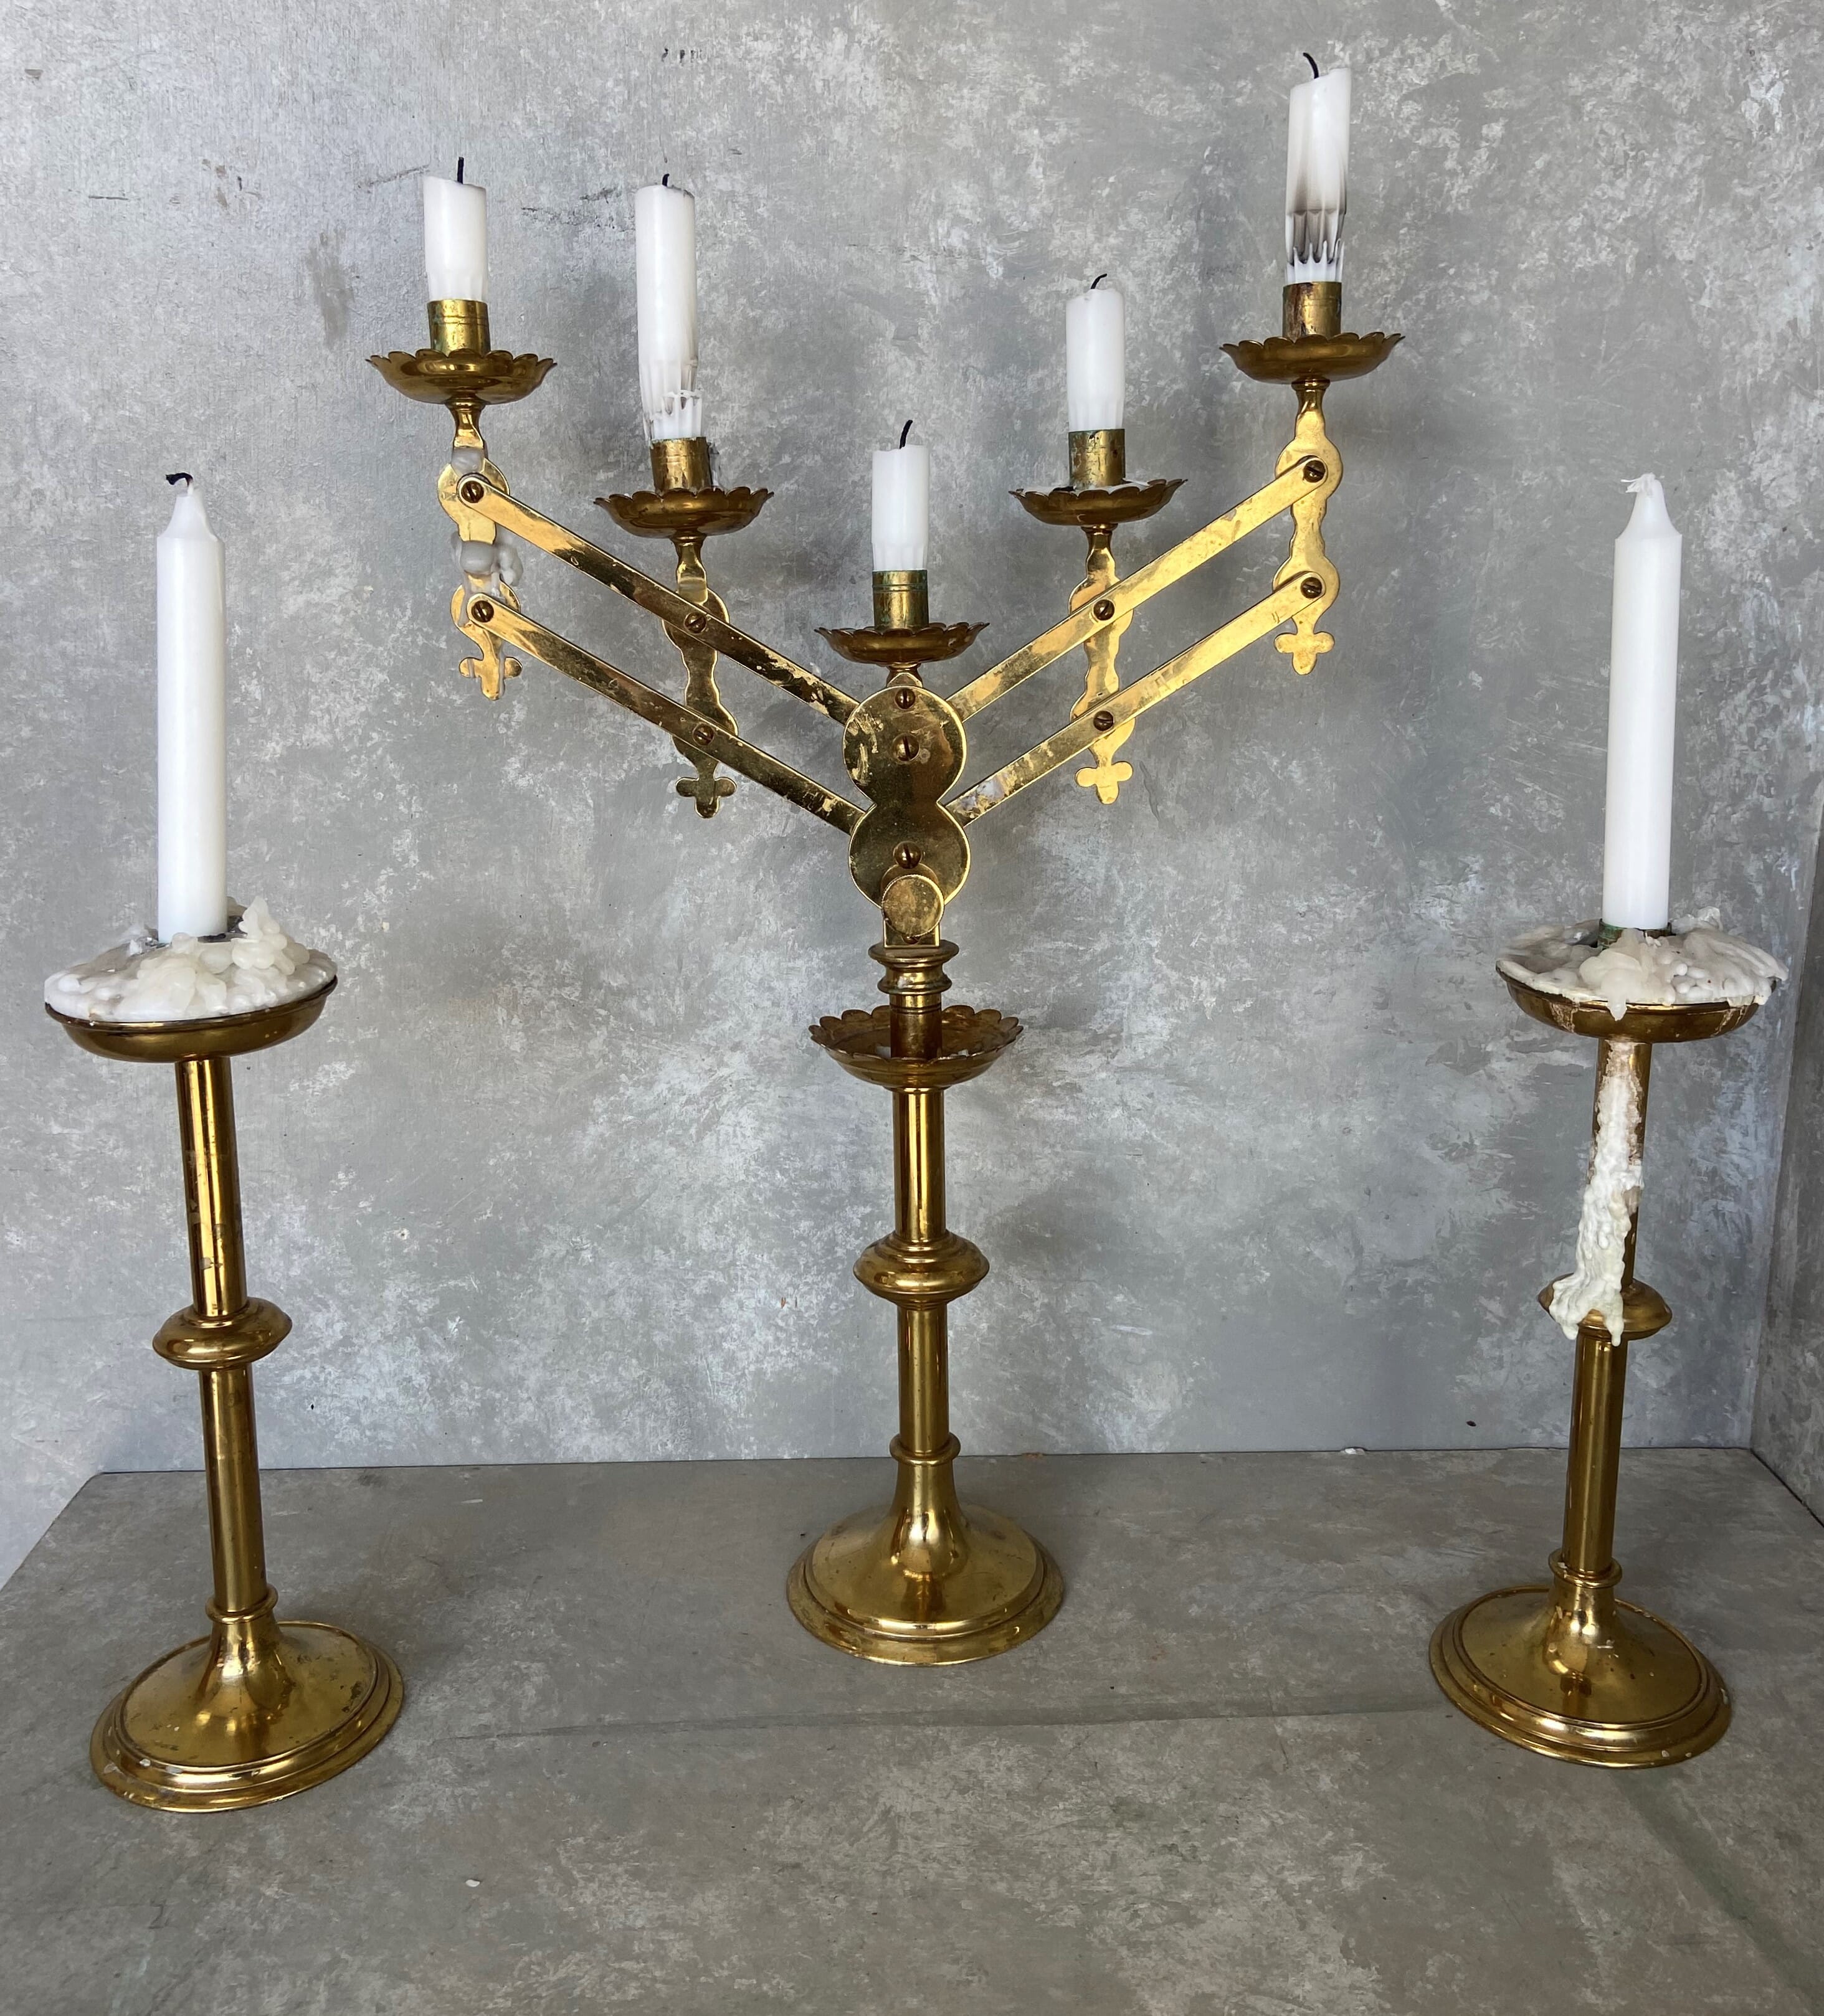 https://cdn.ukaa.com/products/137/21714/victorian-solid-brass-altar-and-candelabra-candlesticks-21714-99yPHULsZkay7X40m5gBIQ.jpg